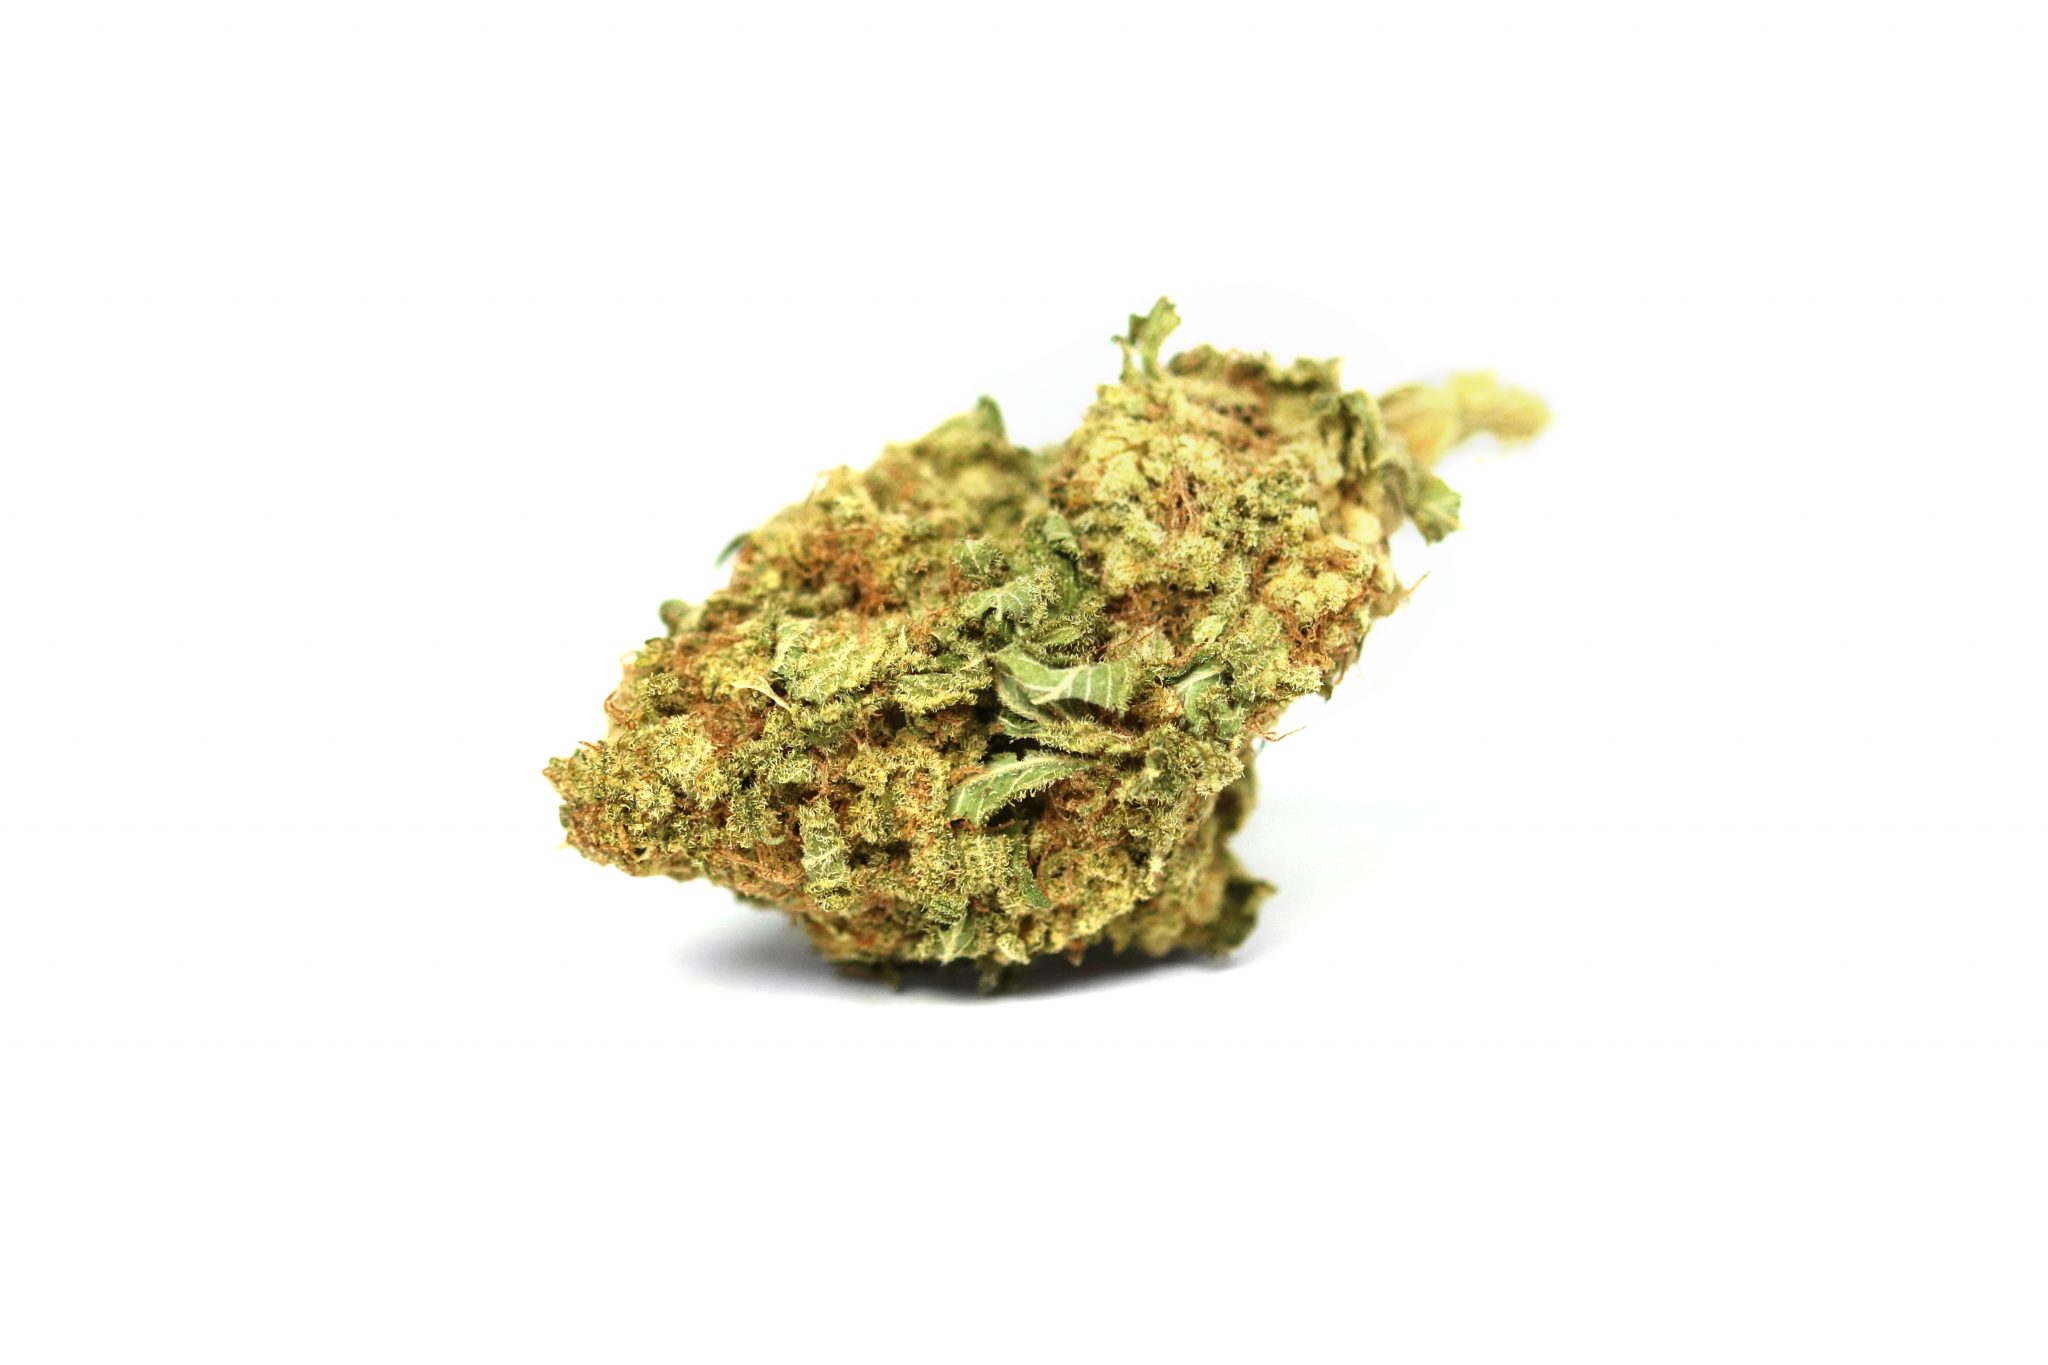 Buy weed online dispensary: Get high-quality weed from an online dispensary!